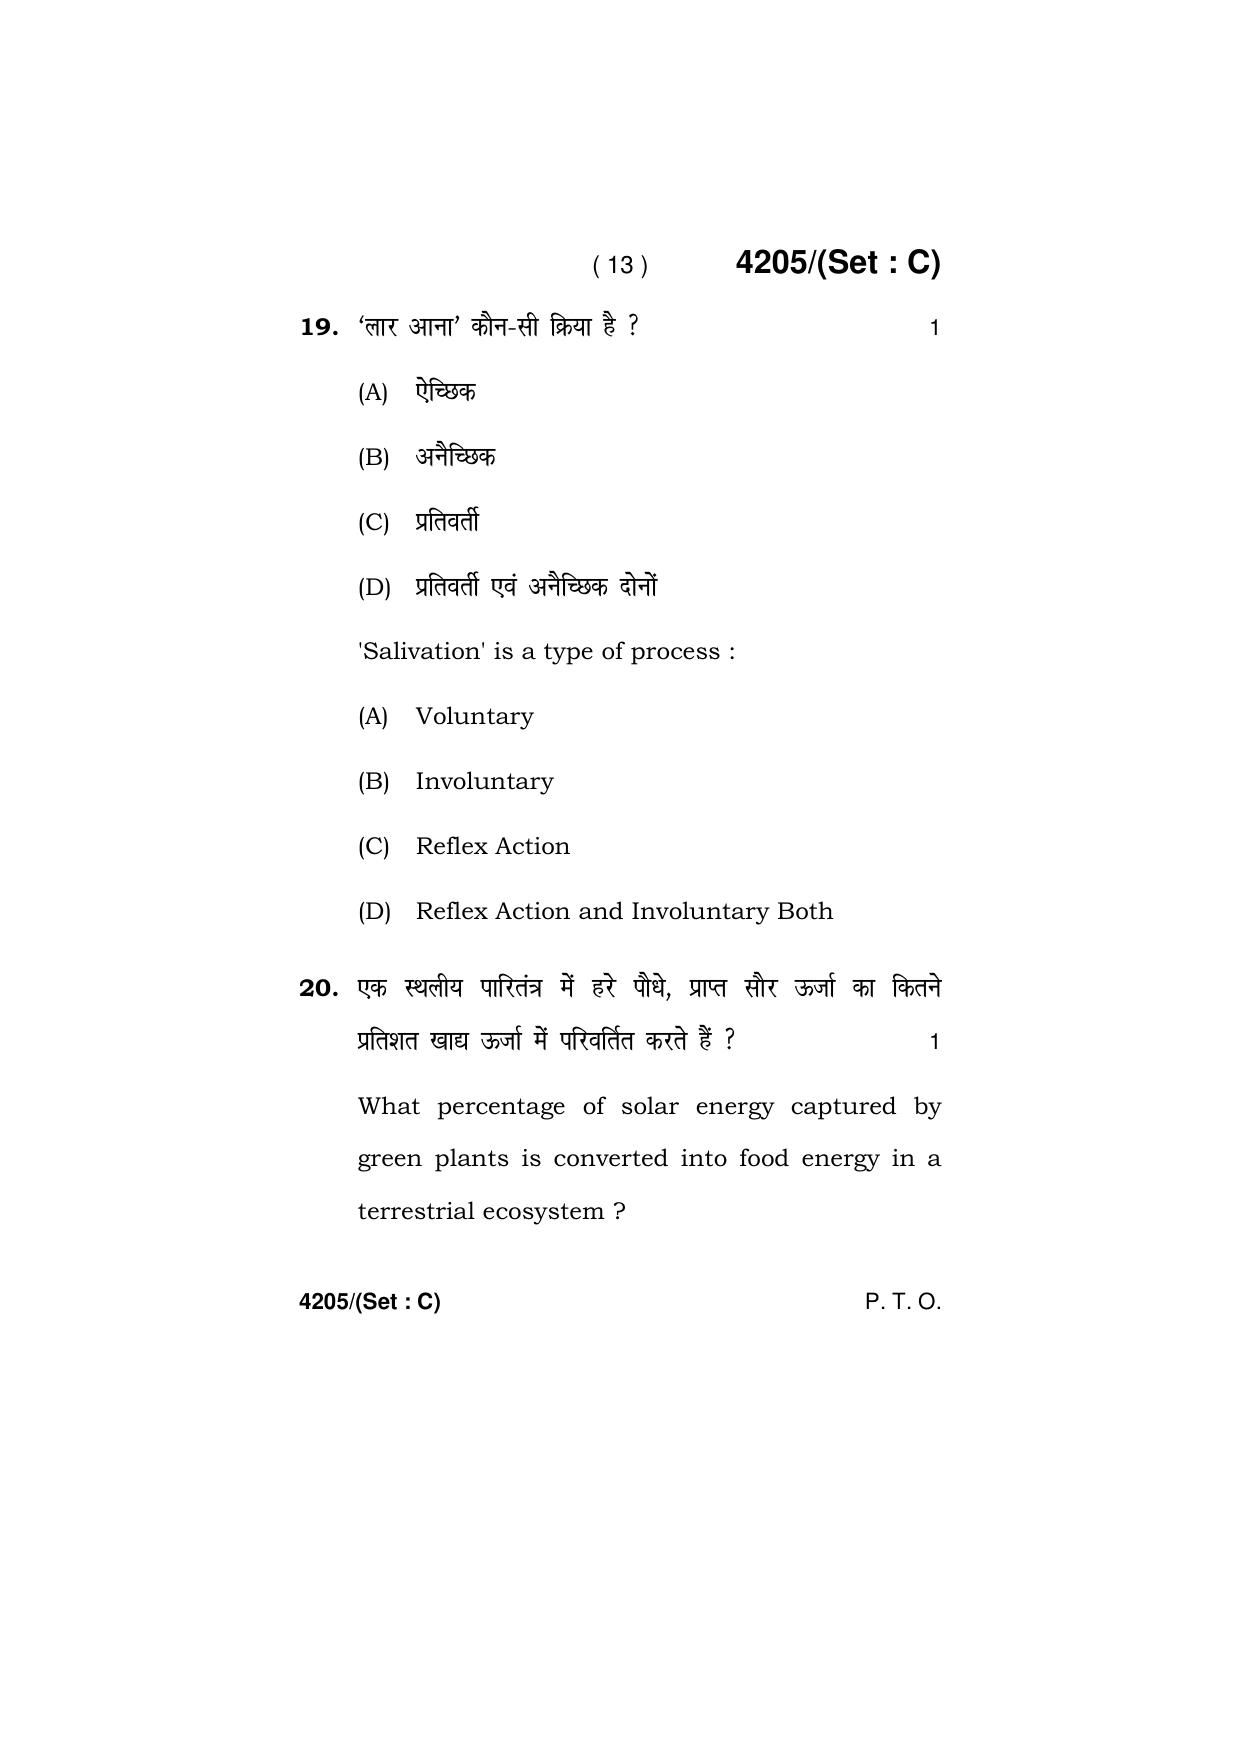 Haryana Board HBSE Class 10 Science (All Set) 2019 Question Paper - Page 45